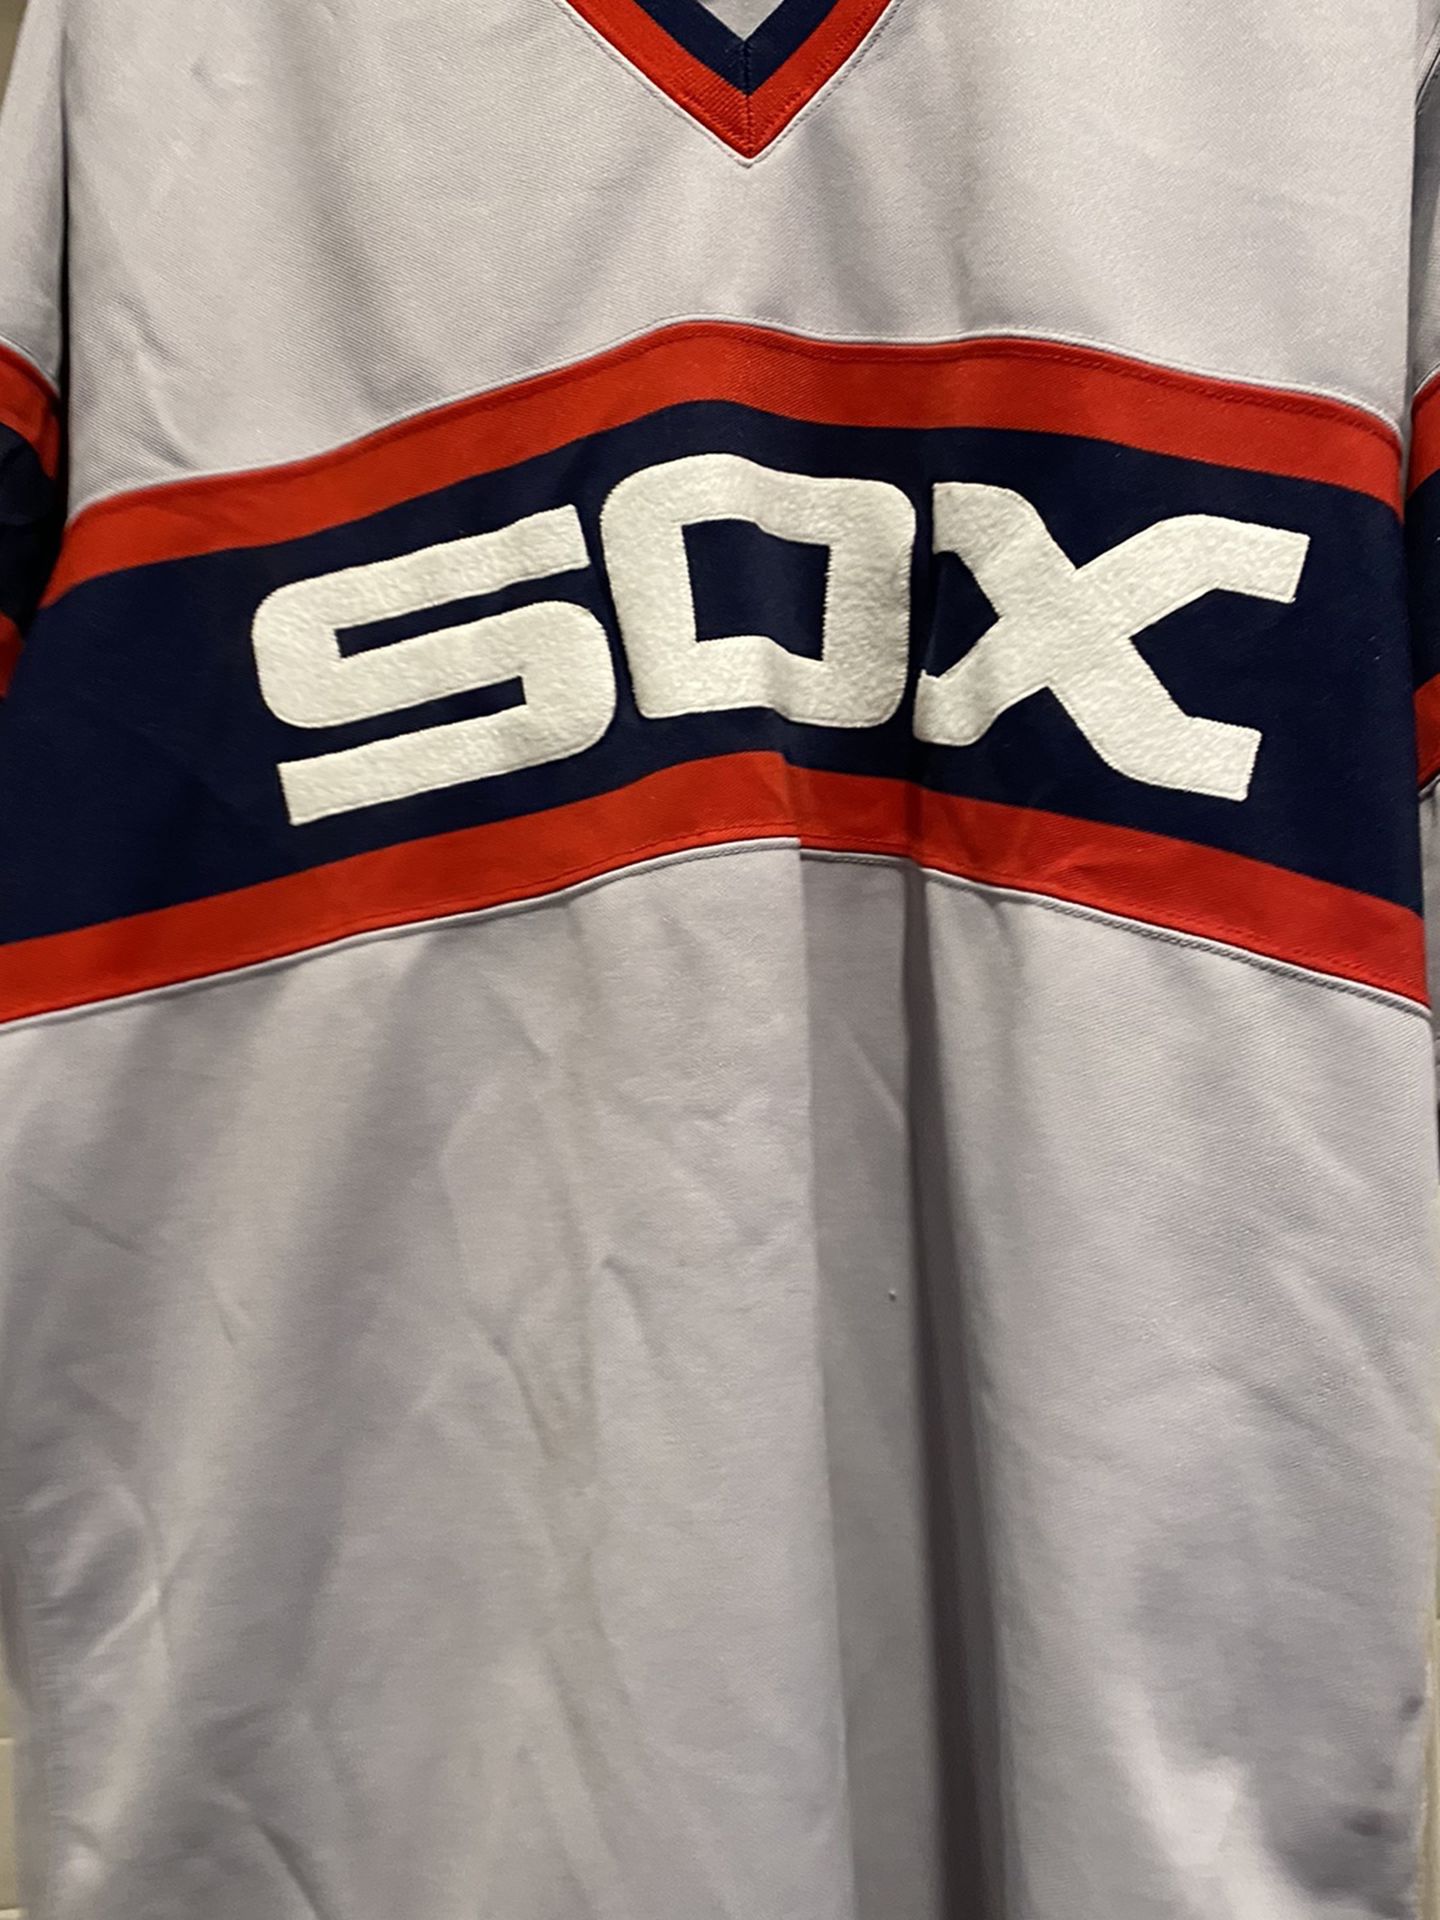 Vintage White Sox 75th Comiskey Park Baseball Majestic Cooperstown Jersey SizeXL